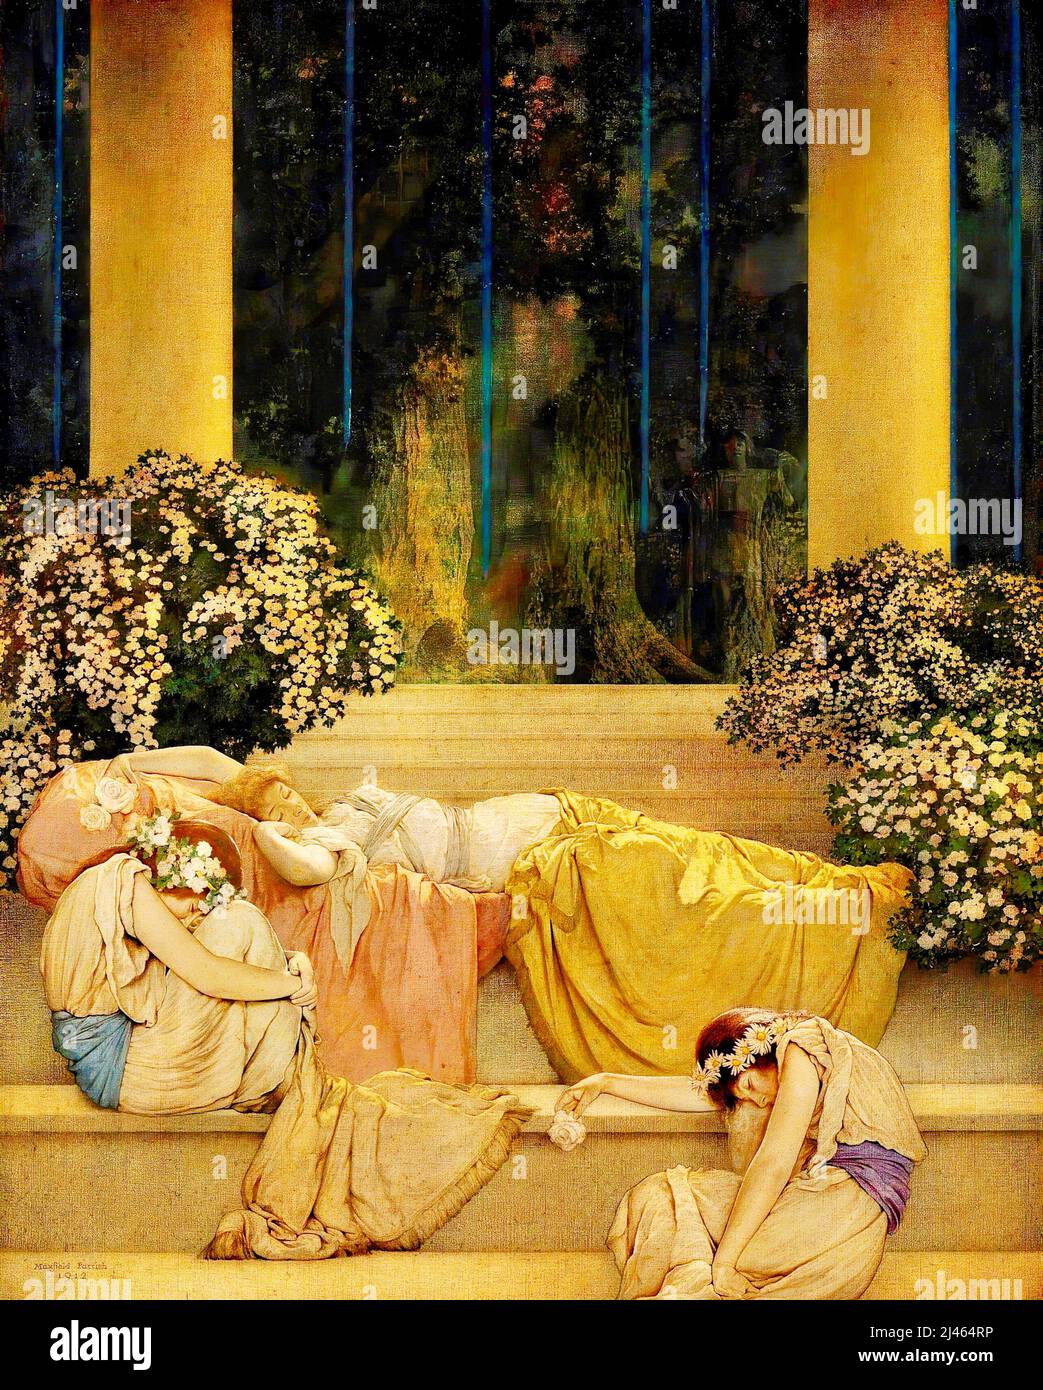 Maxfield Parrish - Sleeping Beauty in the Wood - 1912 Stock Photo